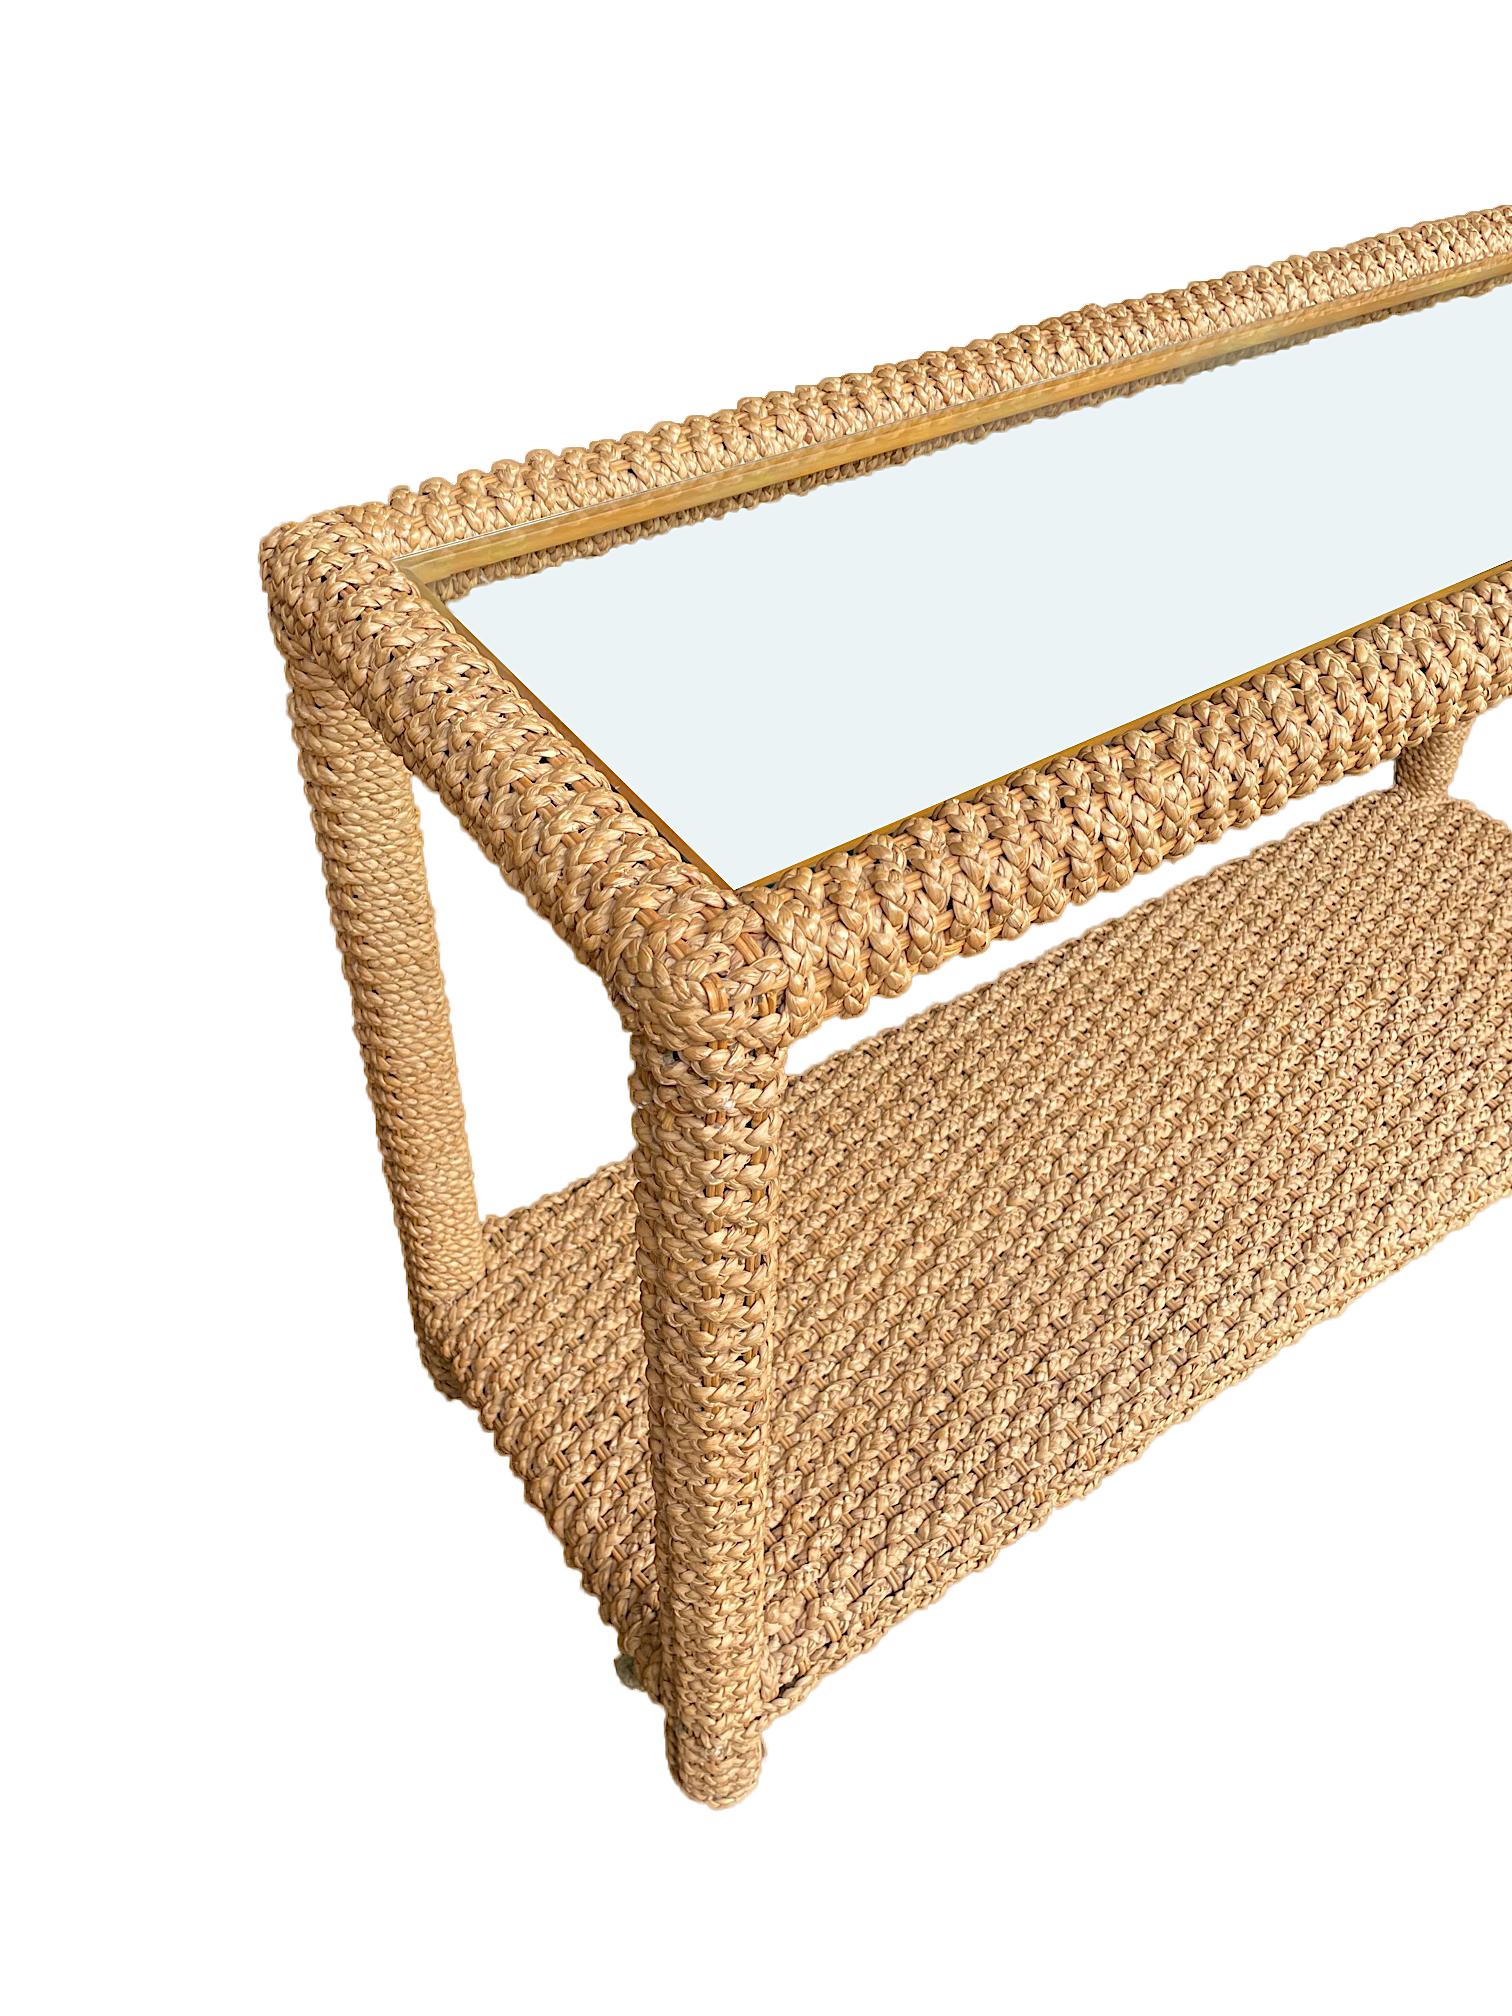 Turned Stunning 1950s Rope Console by Adrian Audoux and Frida Minet with Glass Shelf